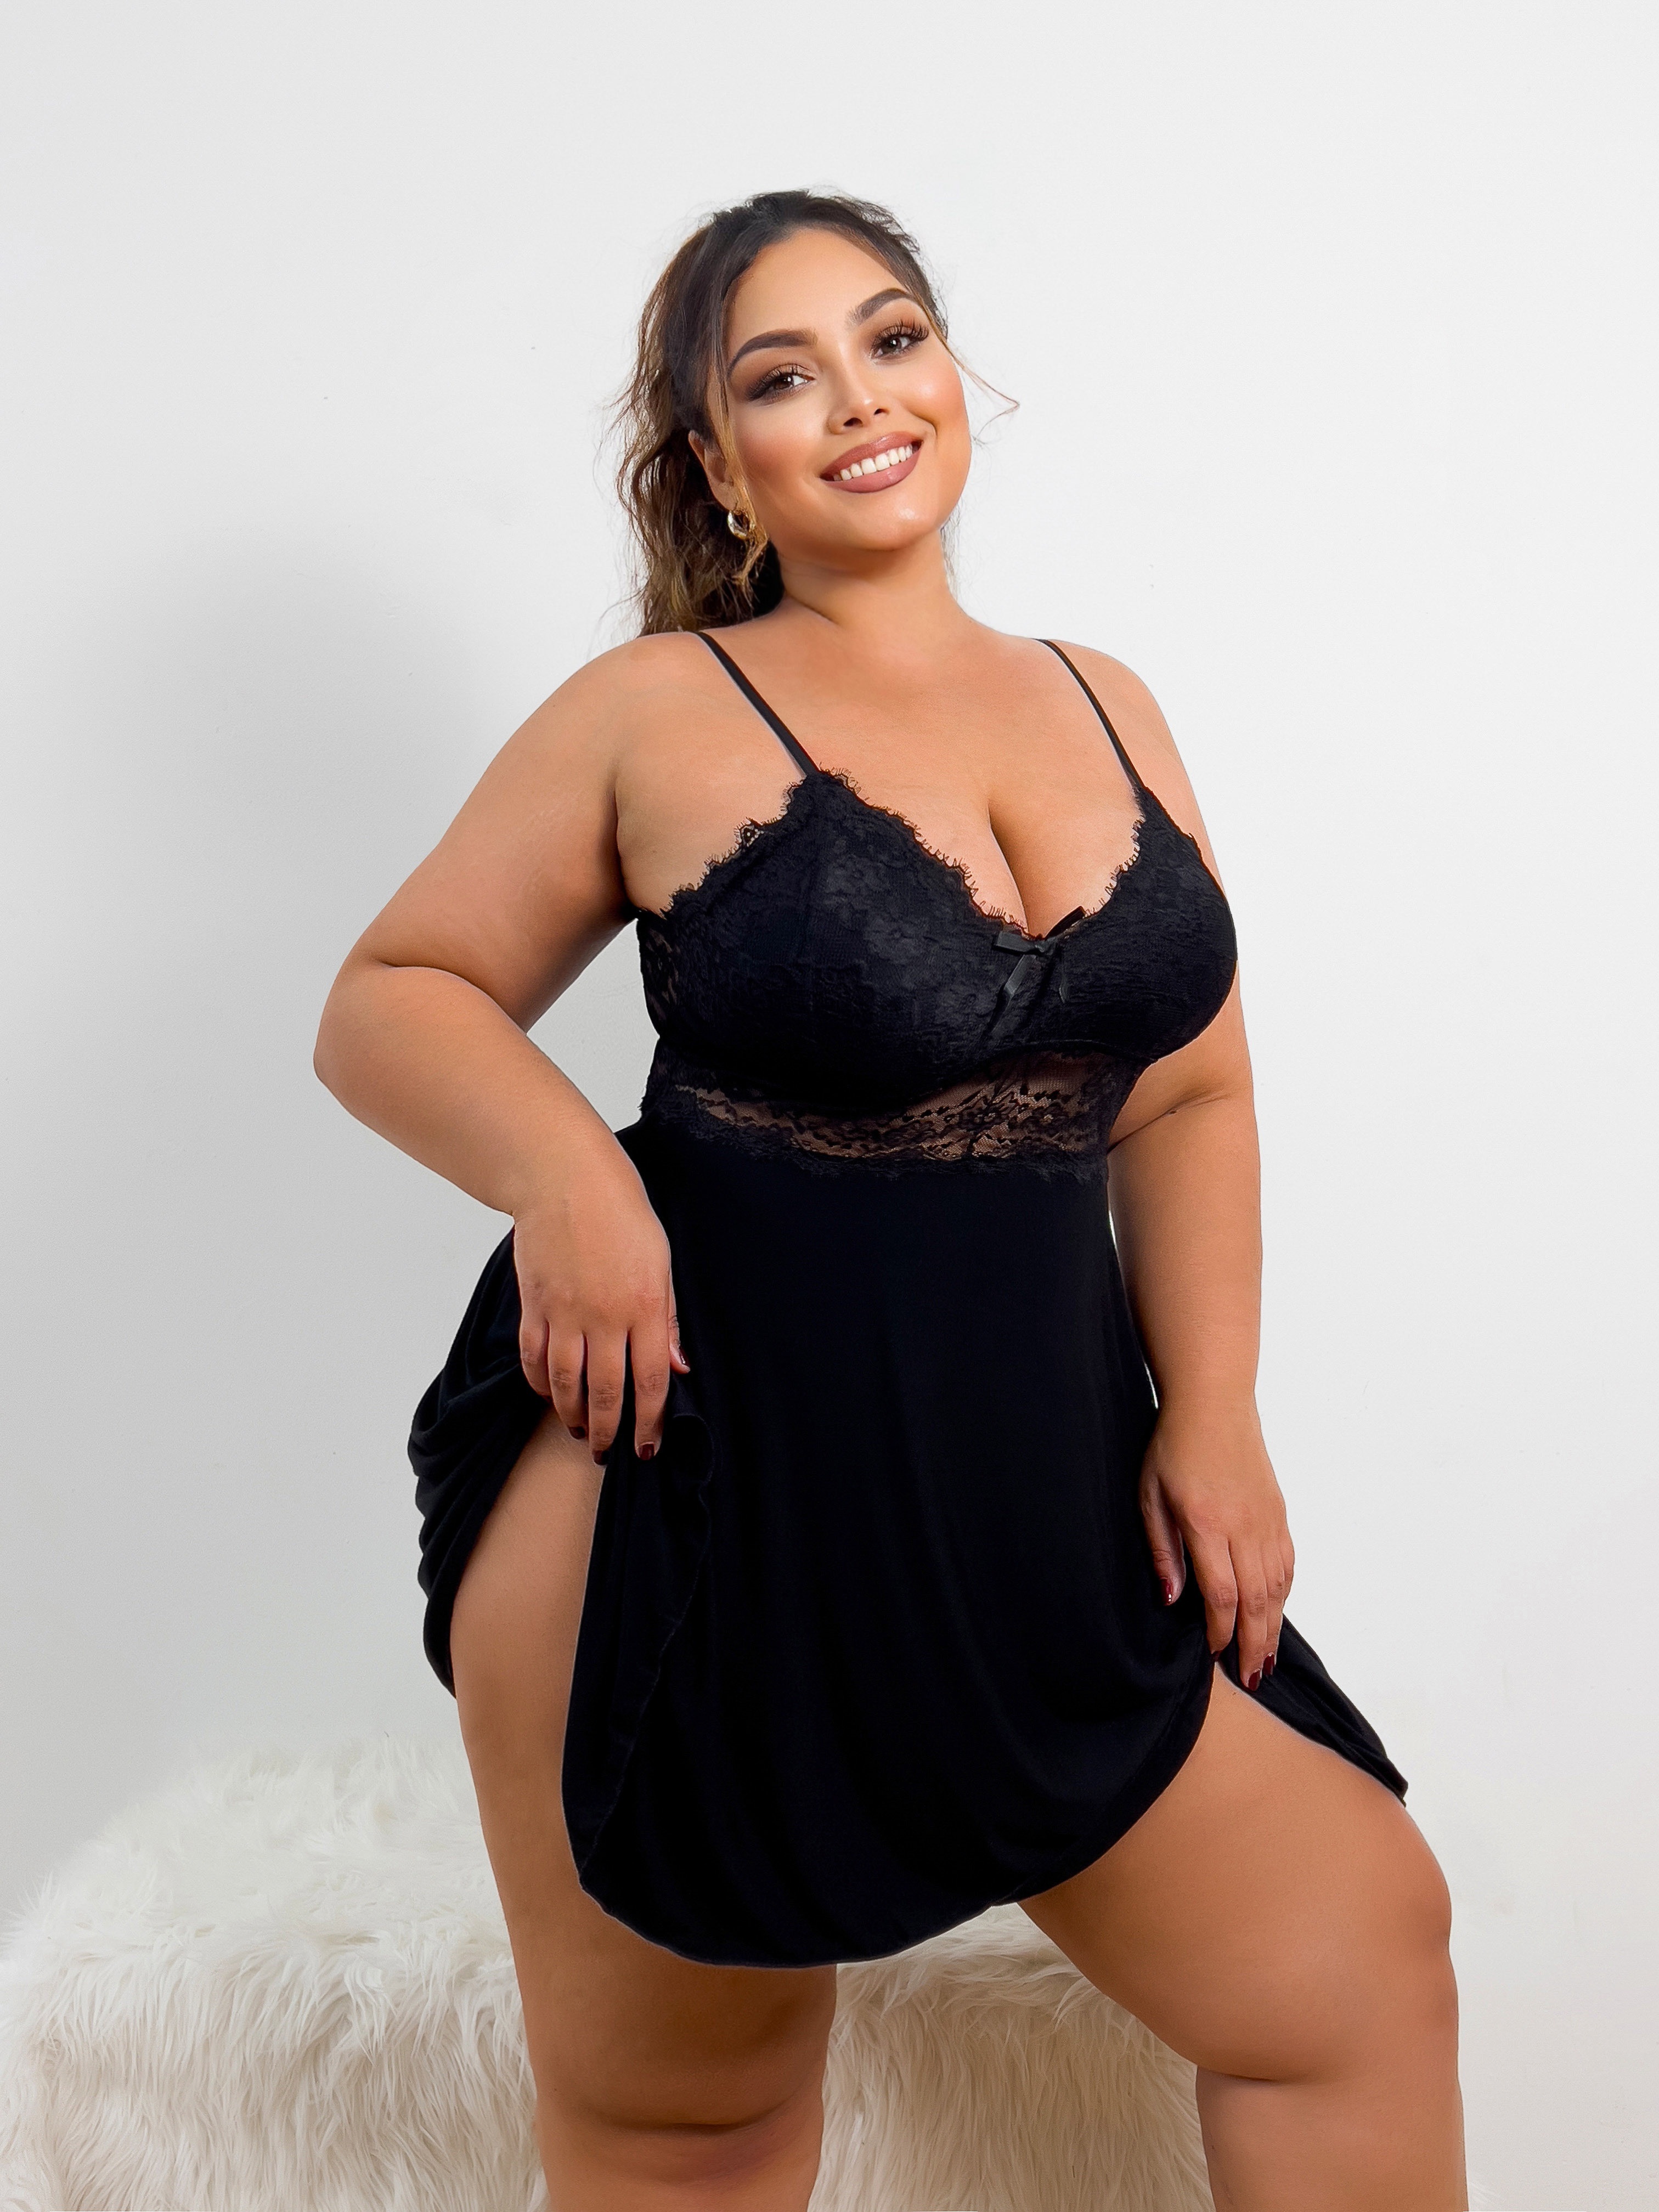 Babydoll Lingerie for Women Naughty Sexy Hot Plus Size with Push